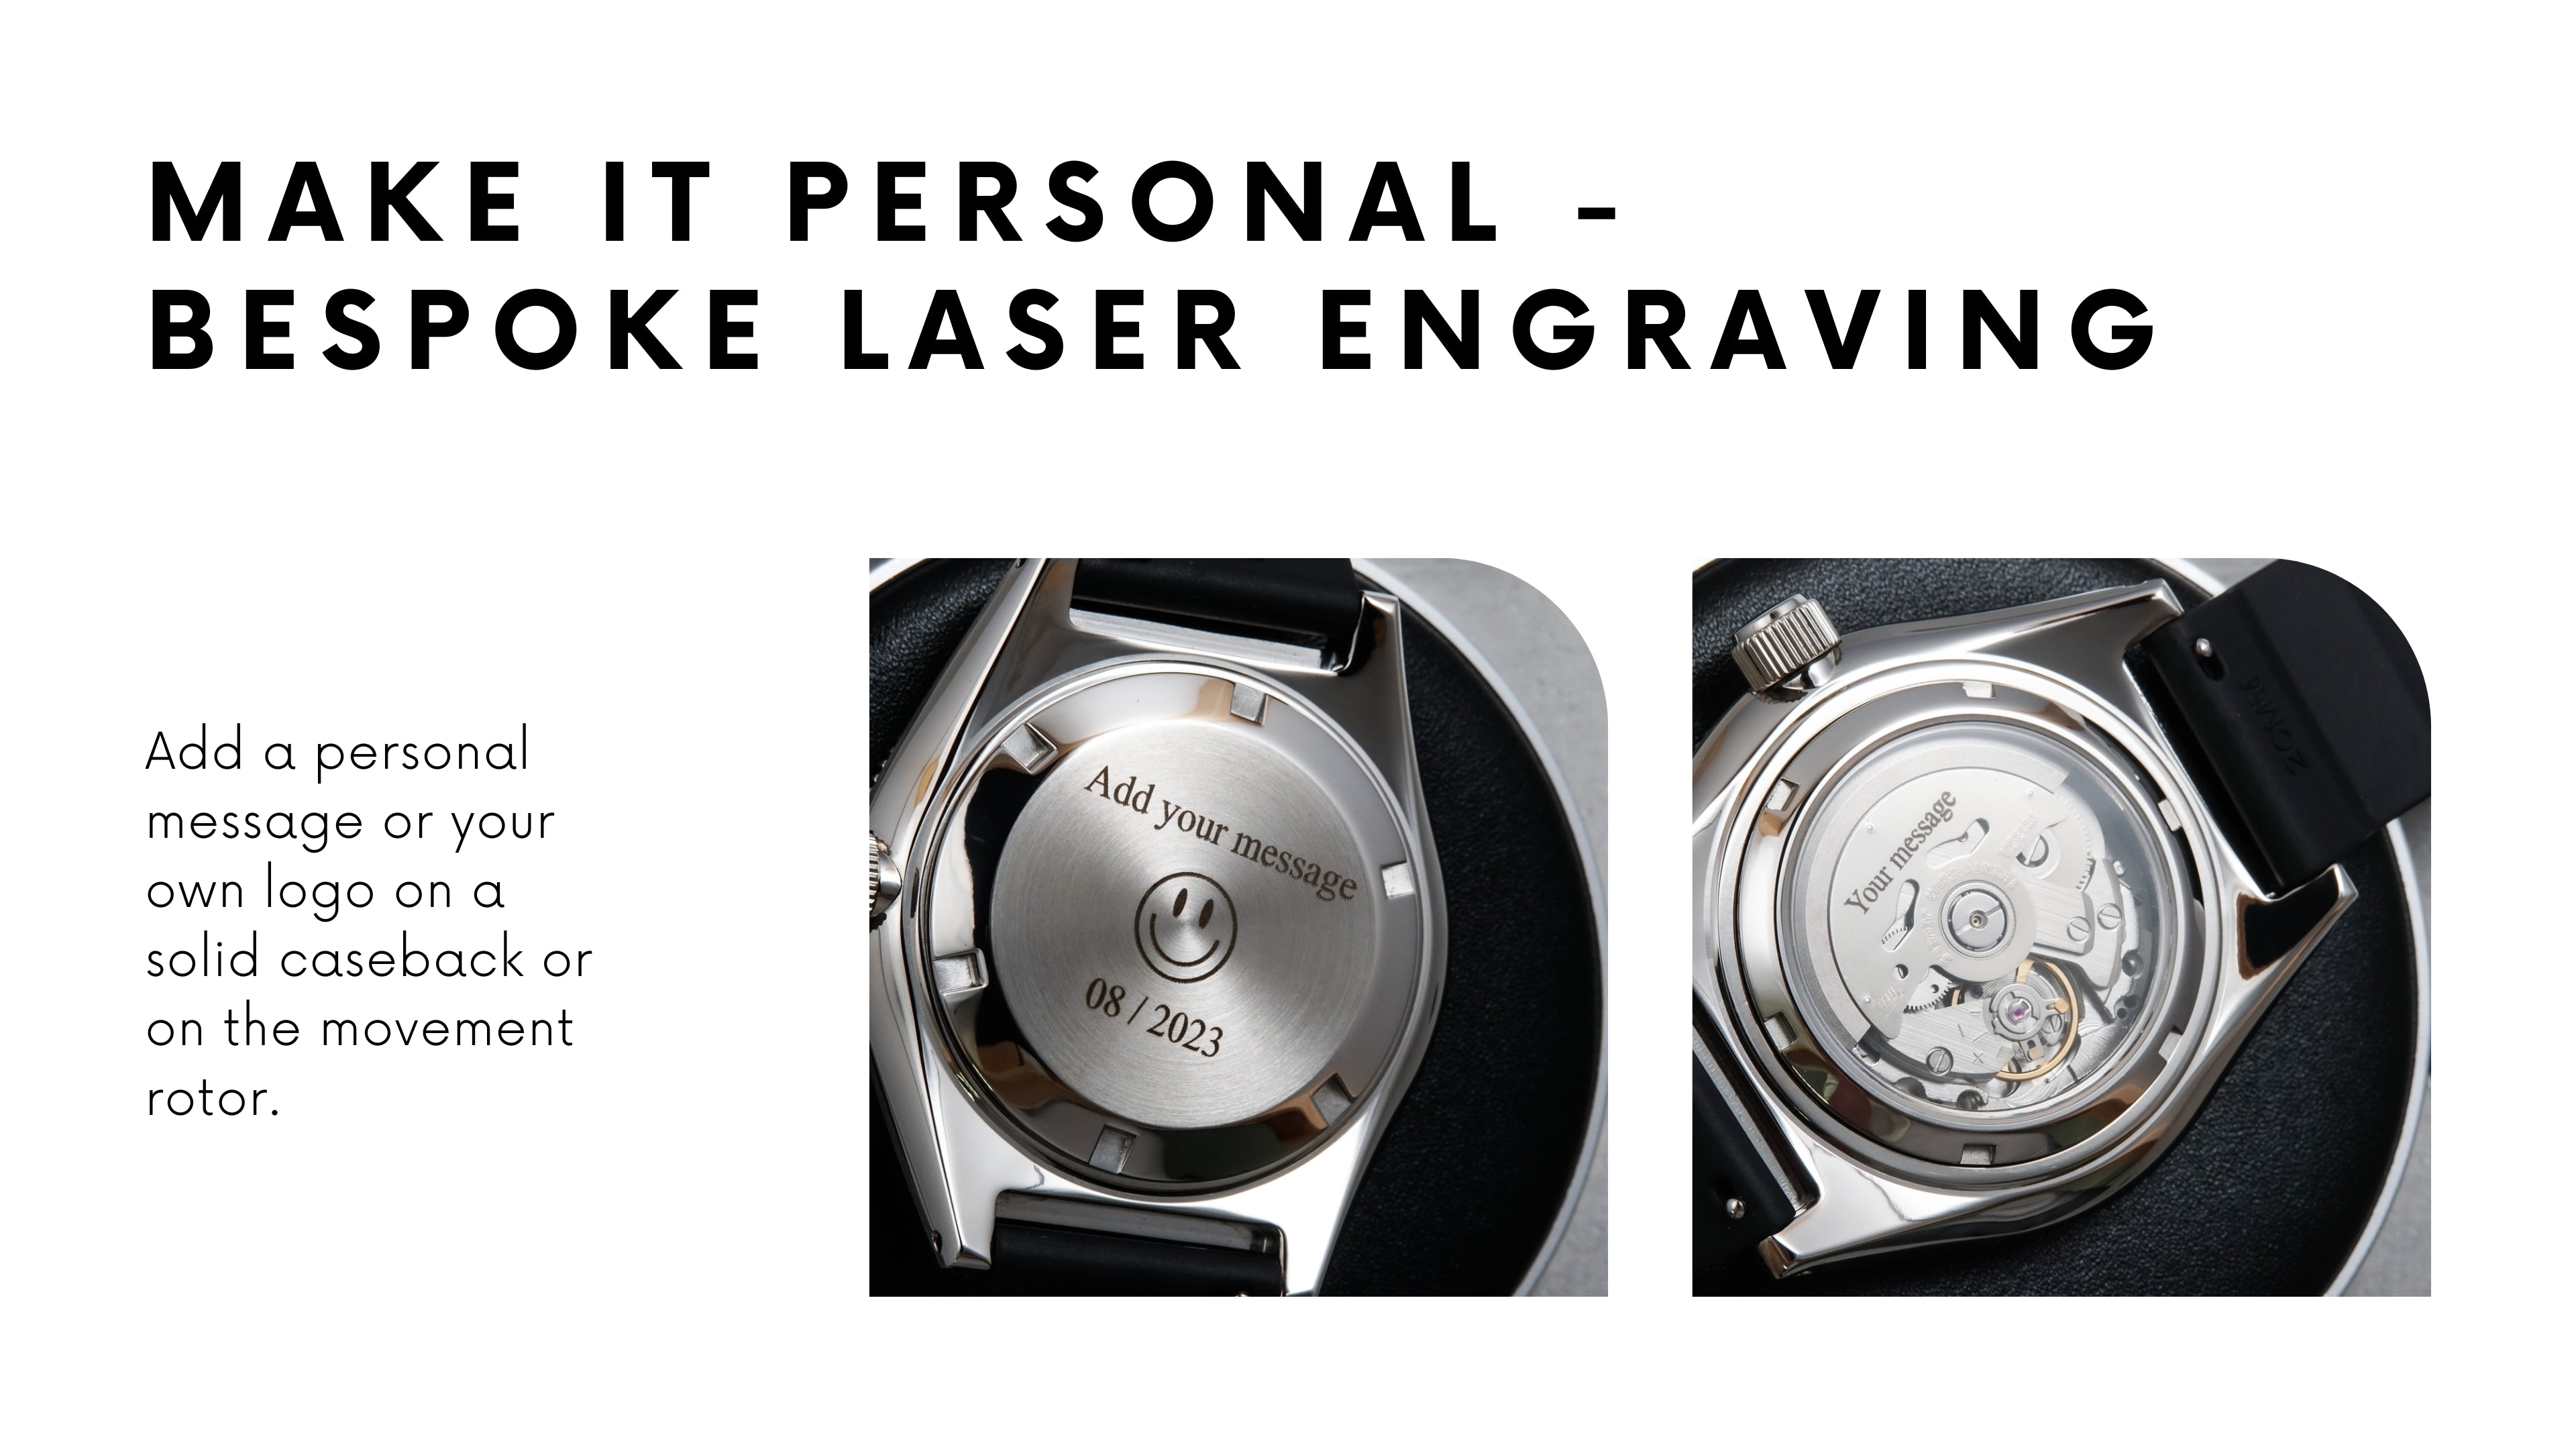 Laser engraving service - Personalise your watch